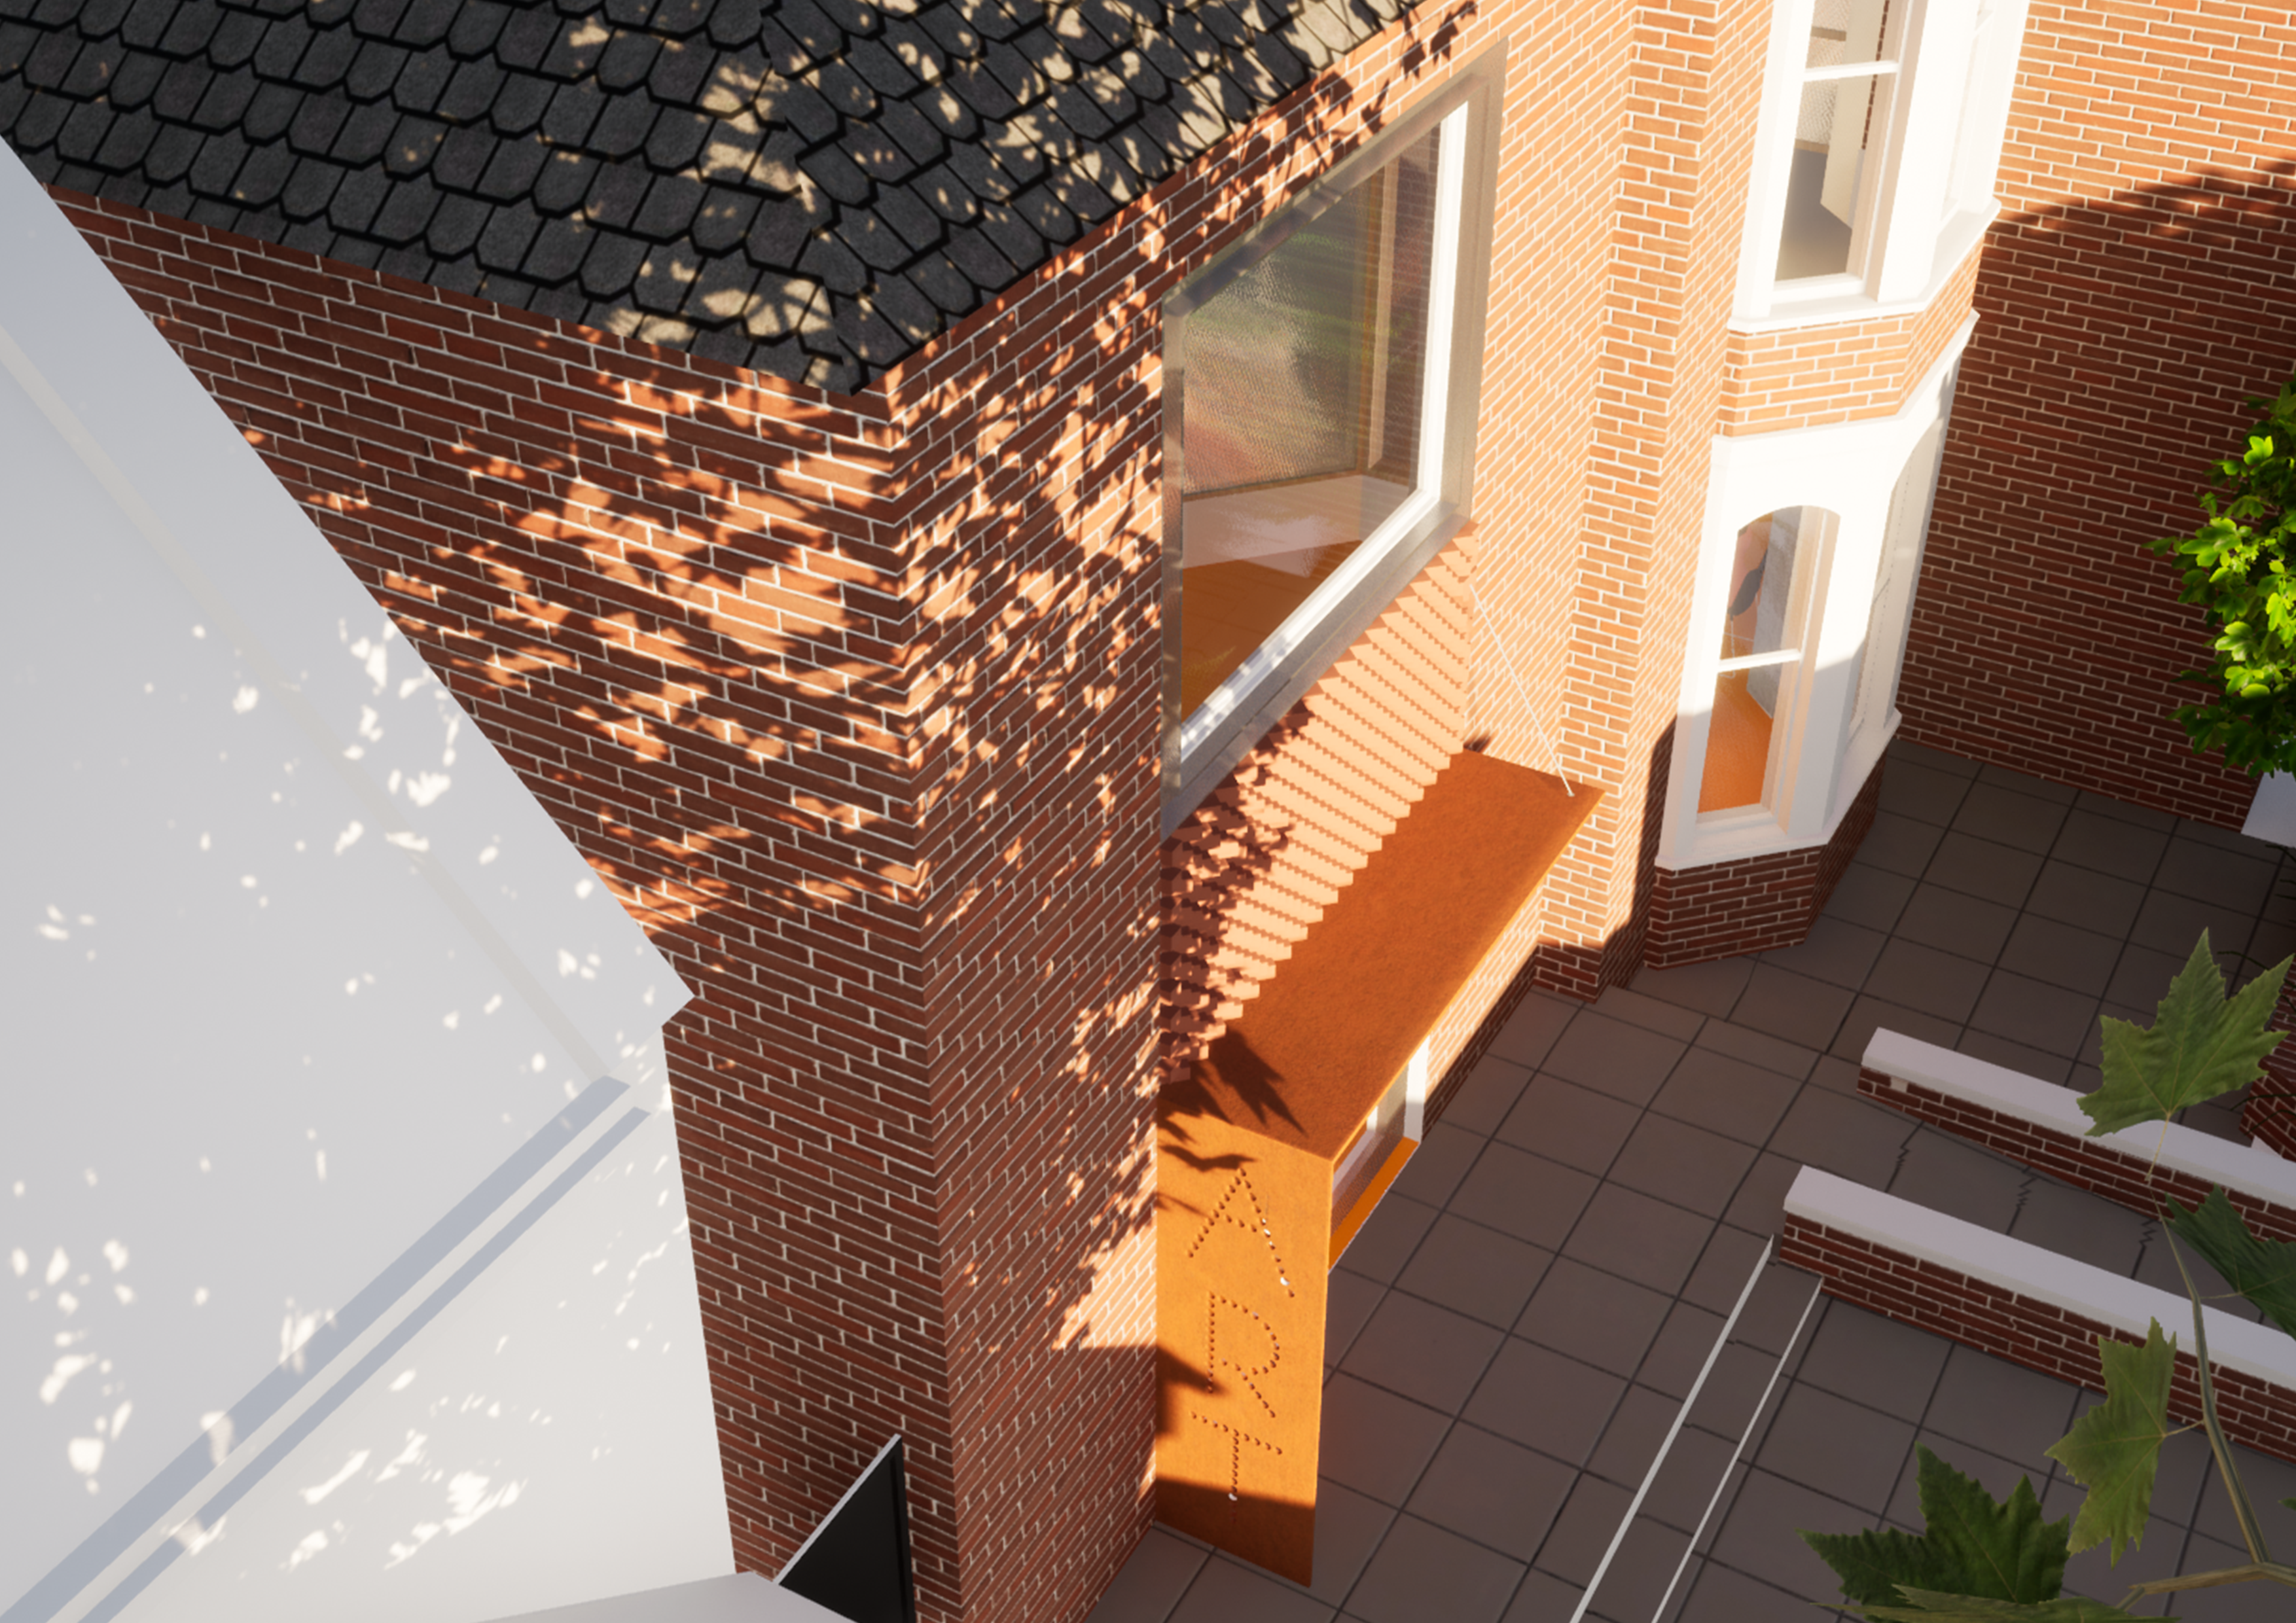 A 3D view of a community centre project in Colchester